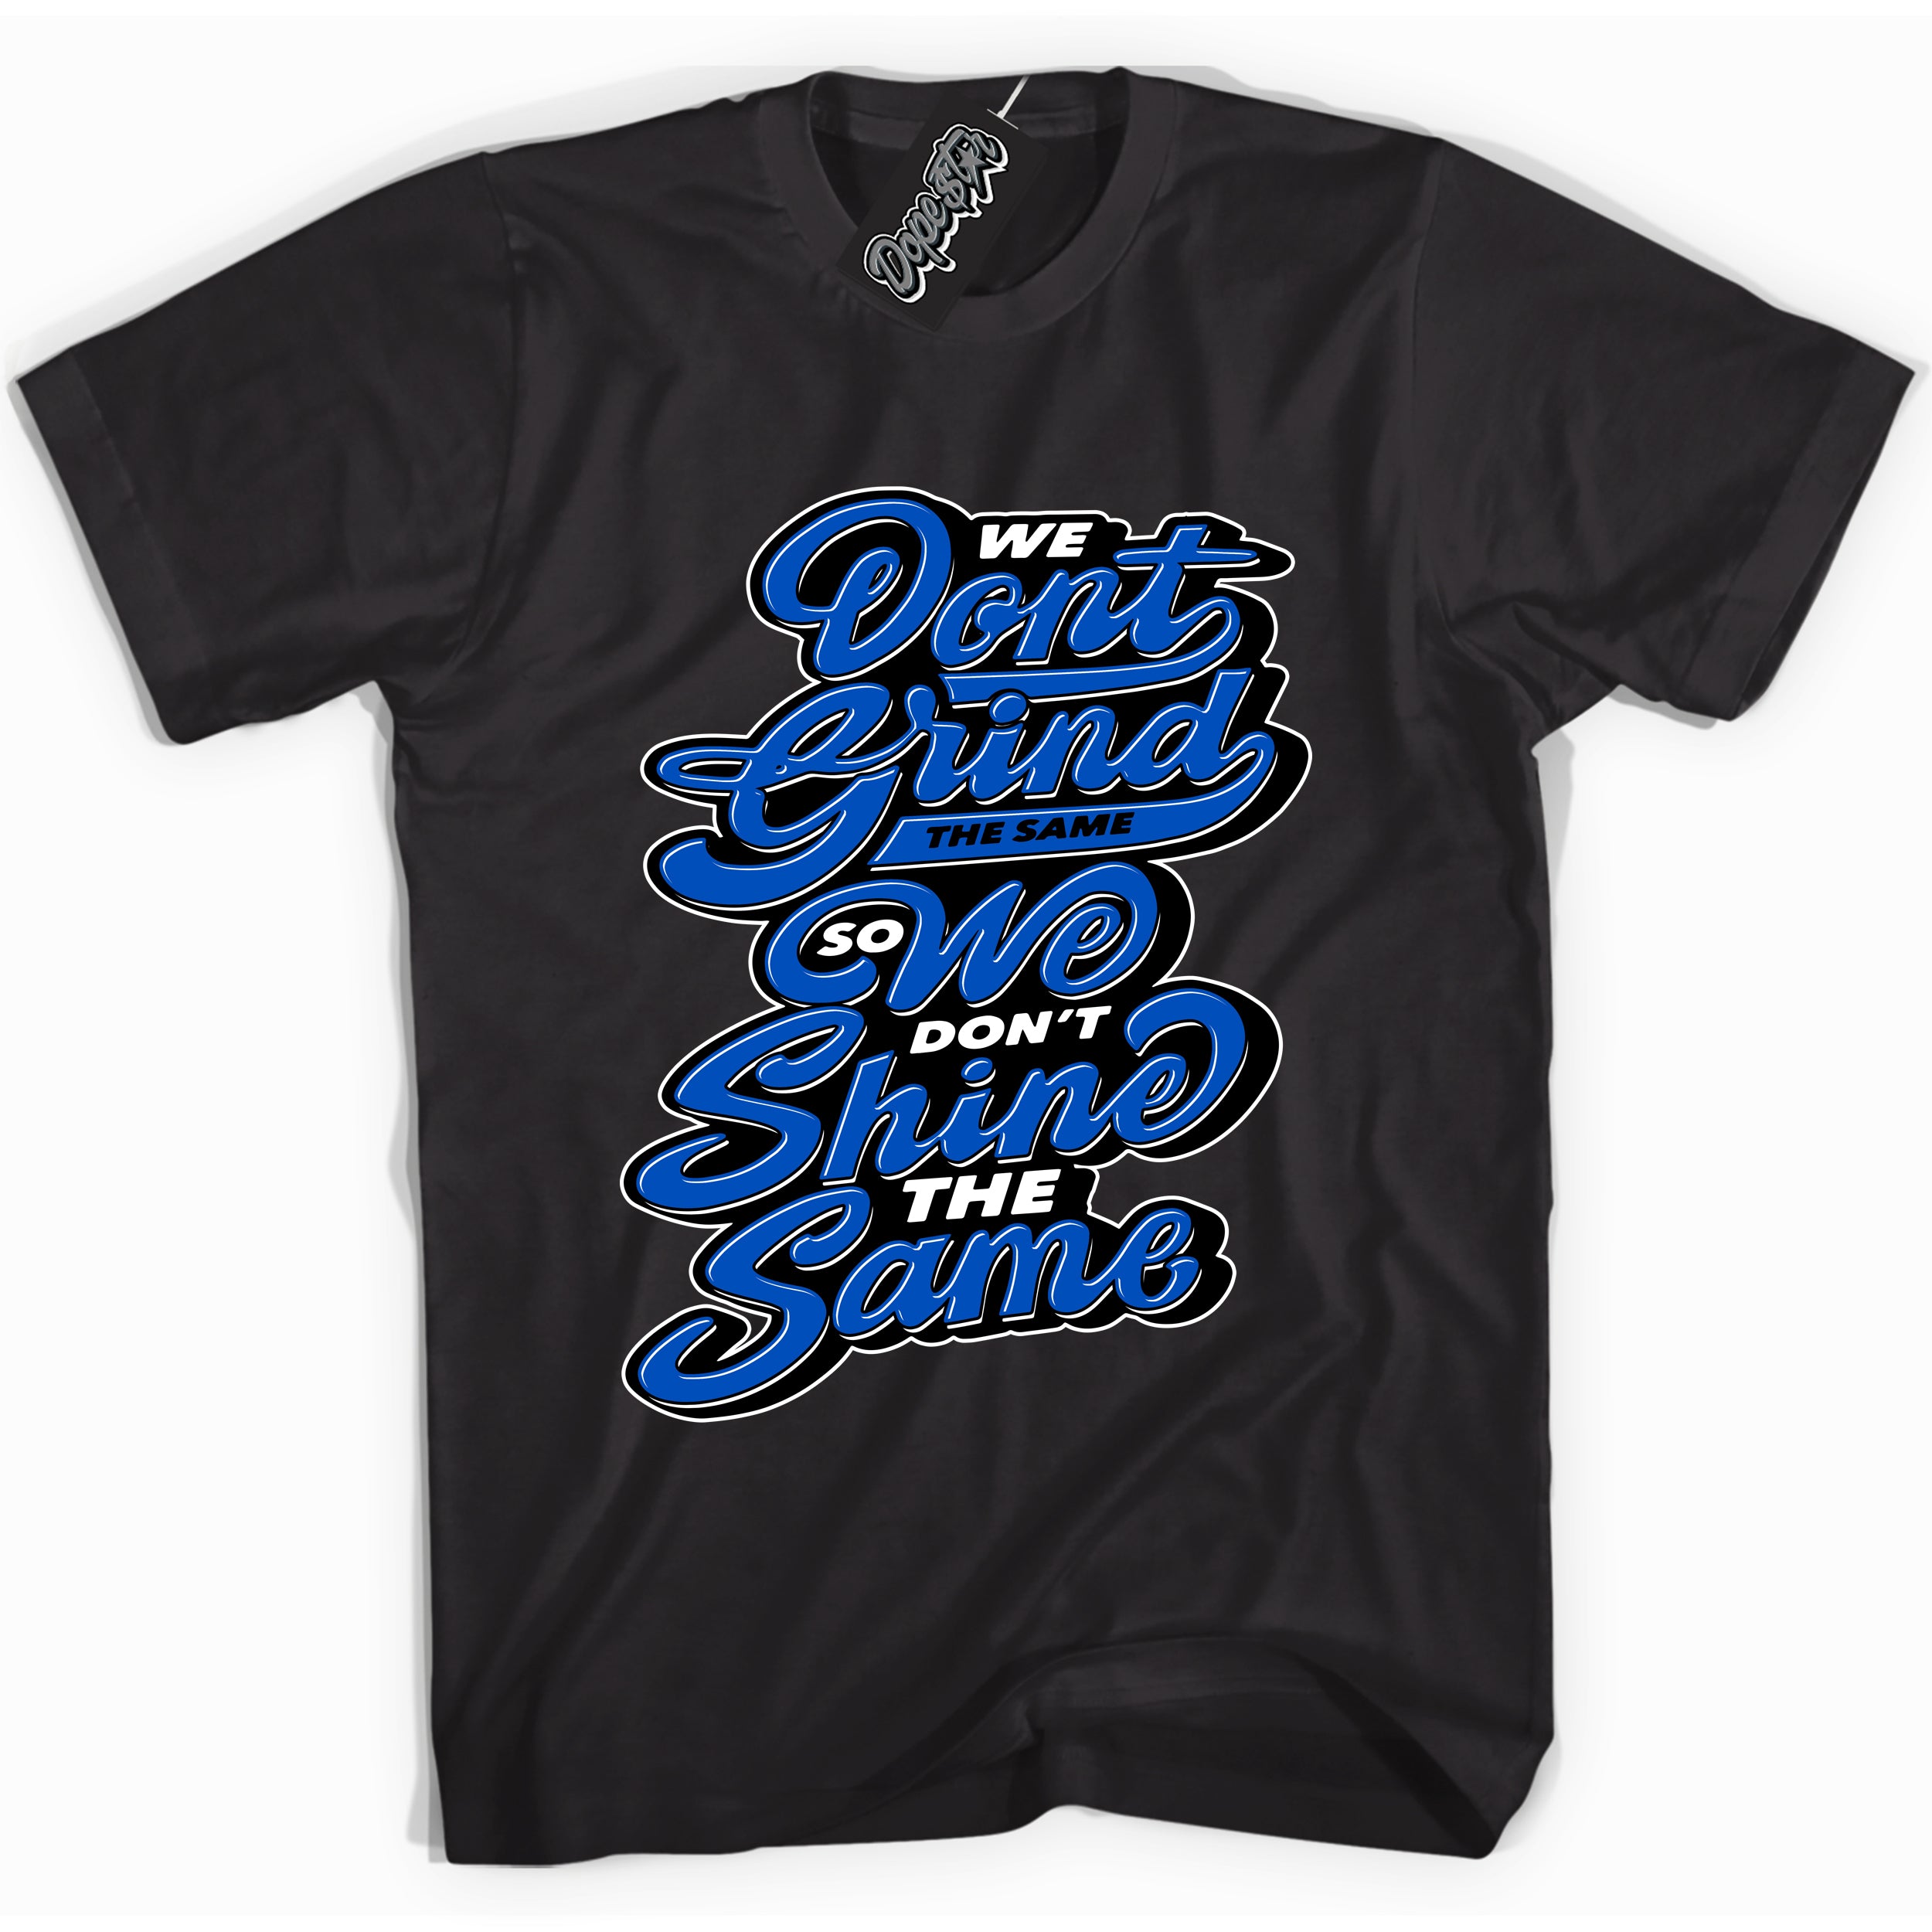 Cool Black graphic tee with Grind Shine print, that perfectly matches OG Royal Reimagined 1s sneakers 